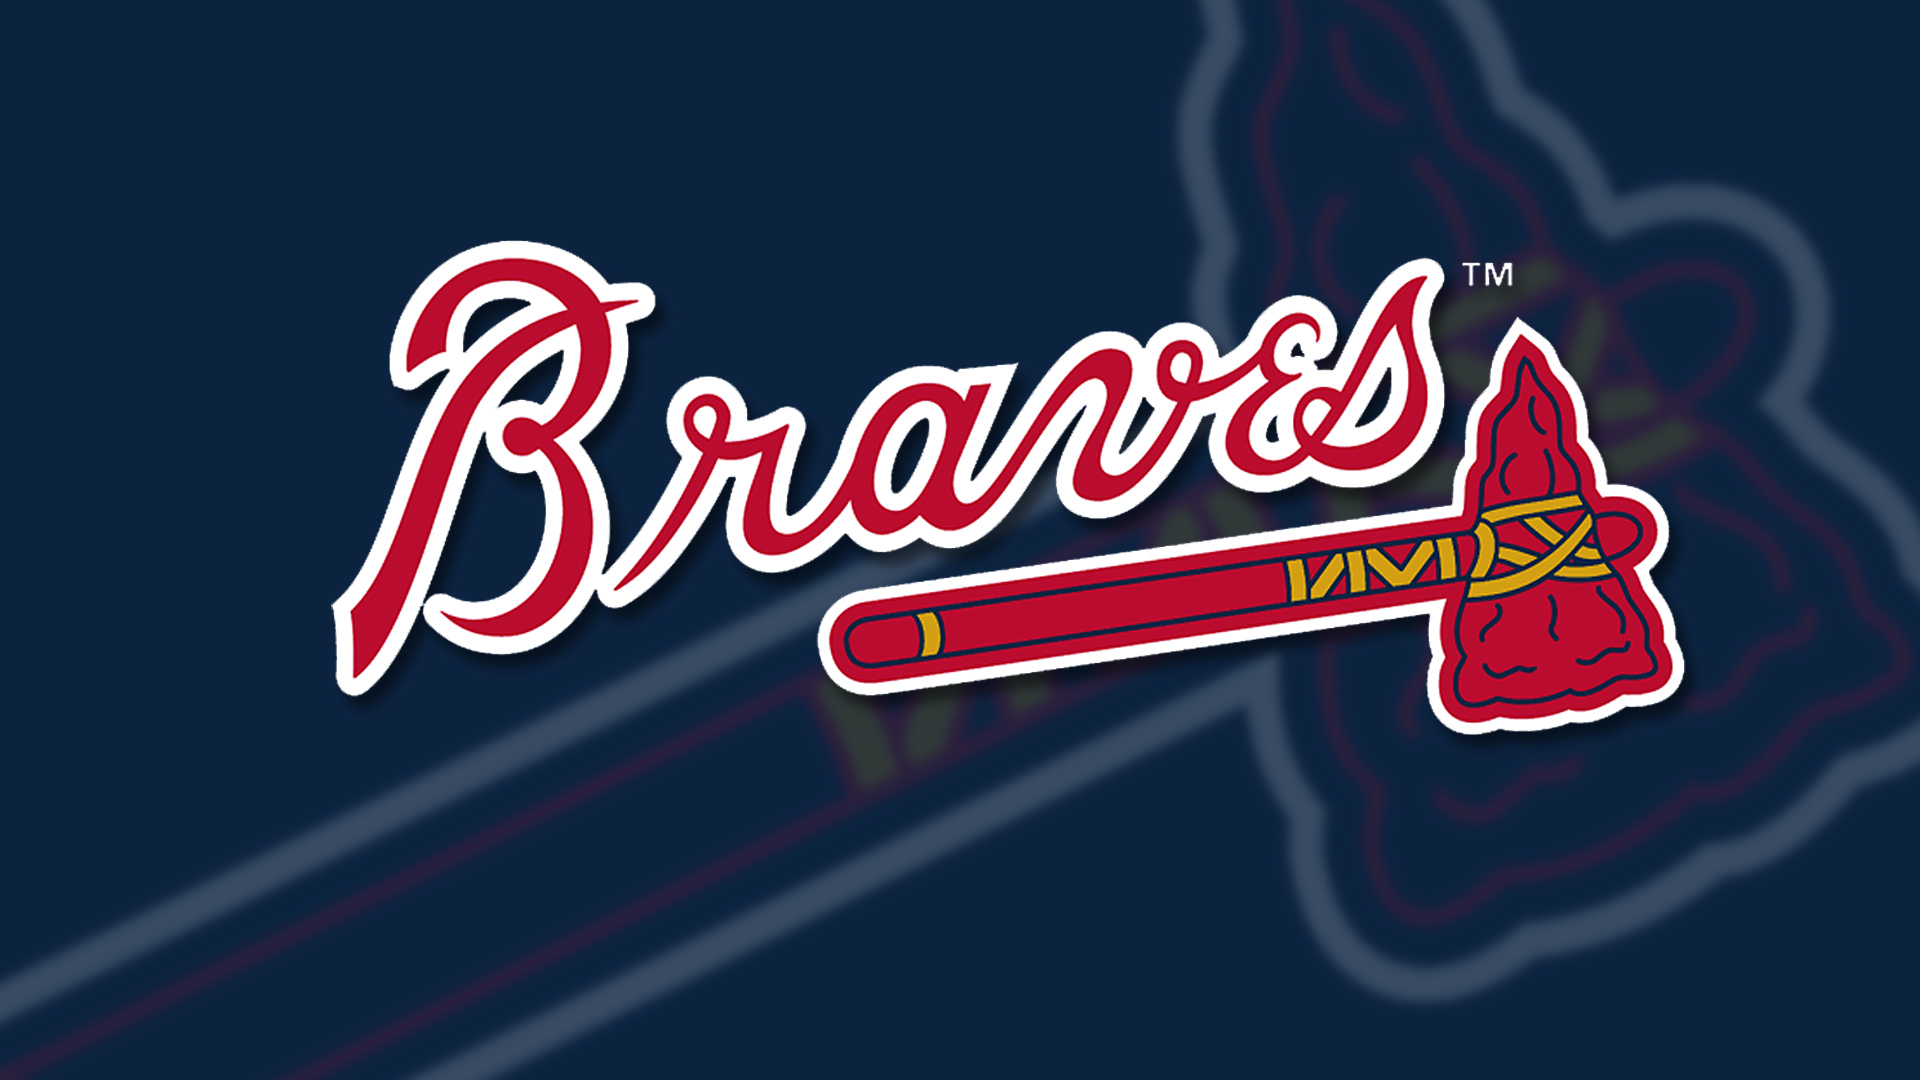 Lucky lumber: Rosario's hot bat leads Braves to Series